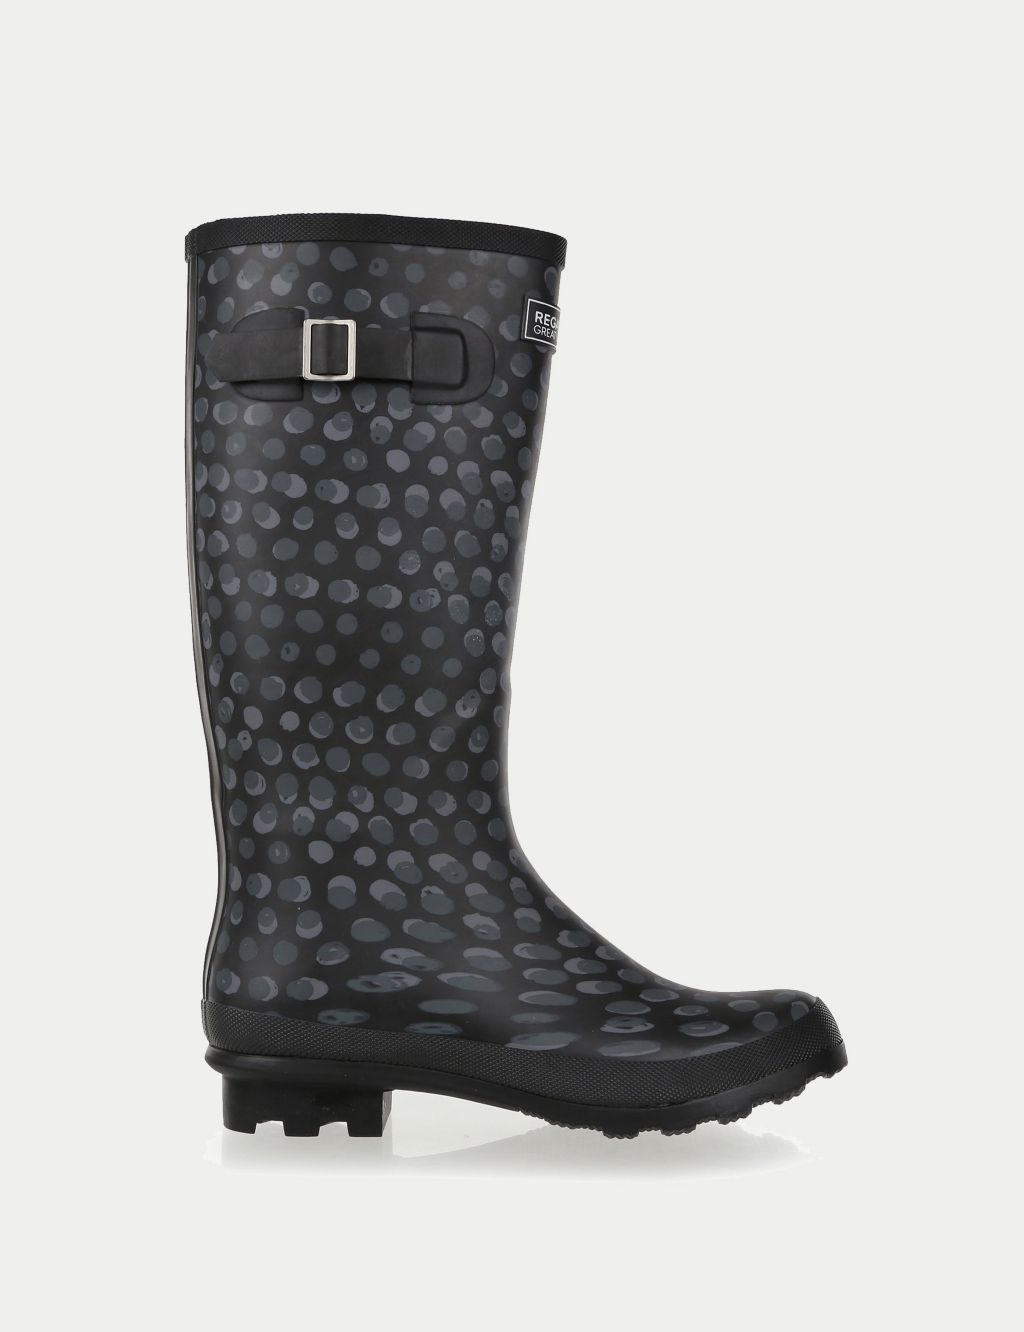 Lady Fairweather II Patterned Wellies